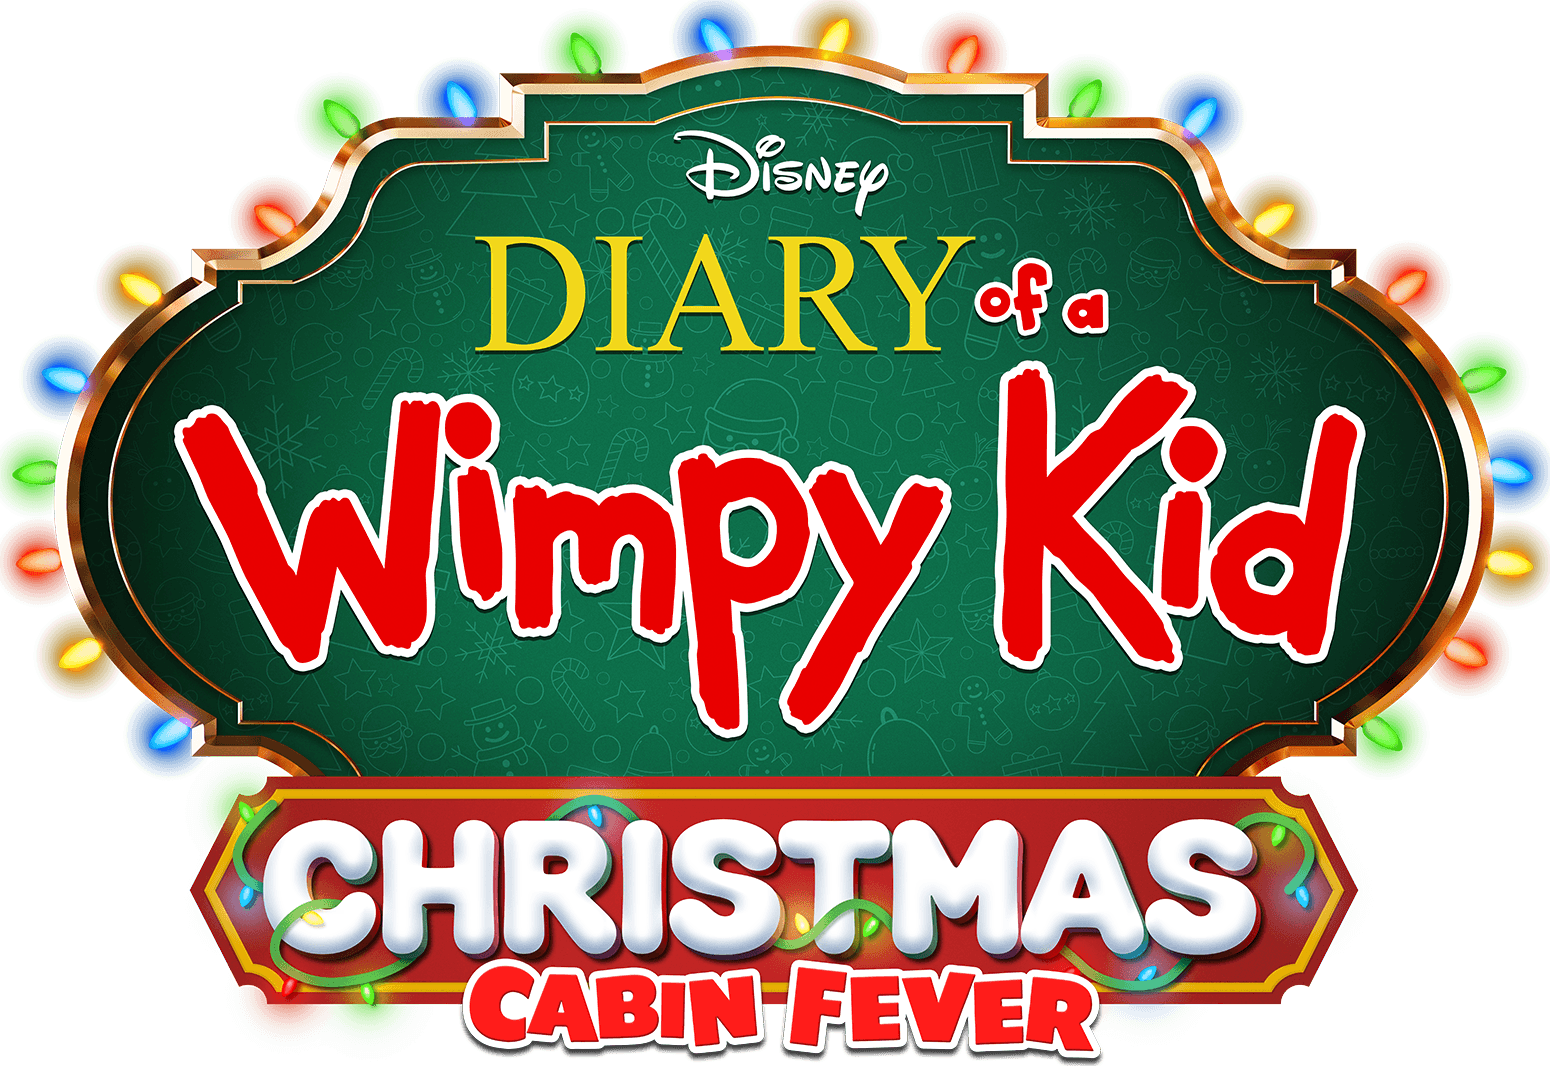 Diary of a Wimpy Kid Christmas: Cabin Fever logo